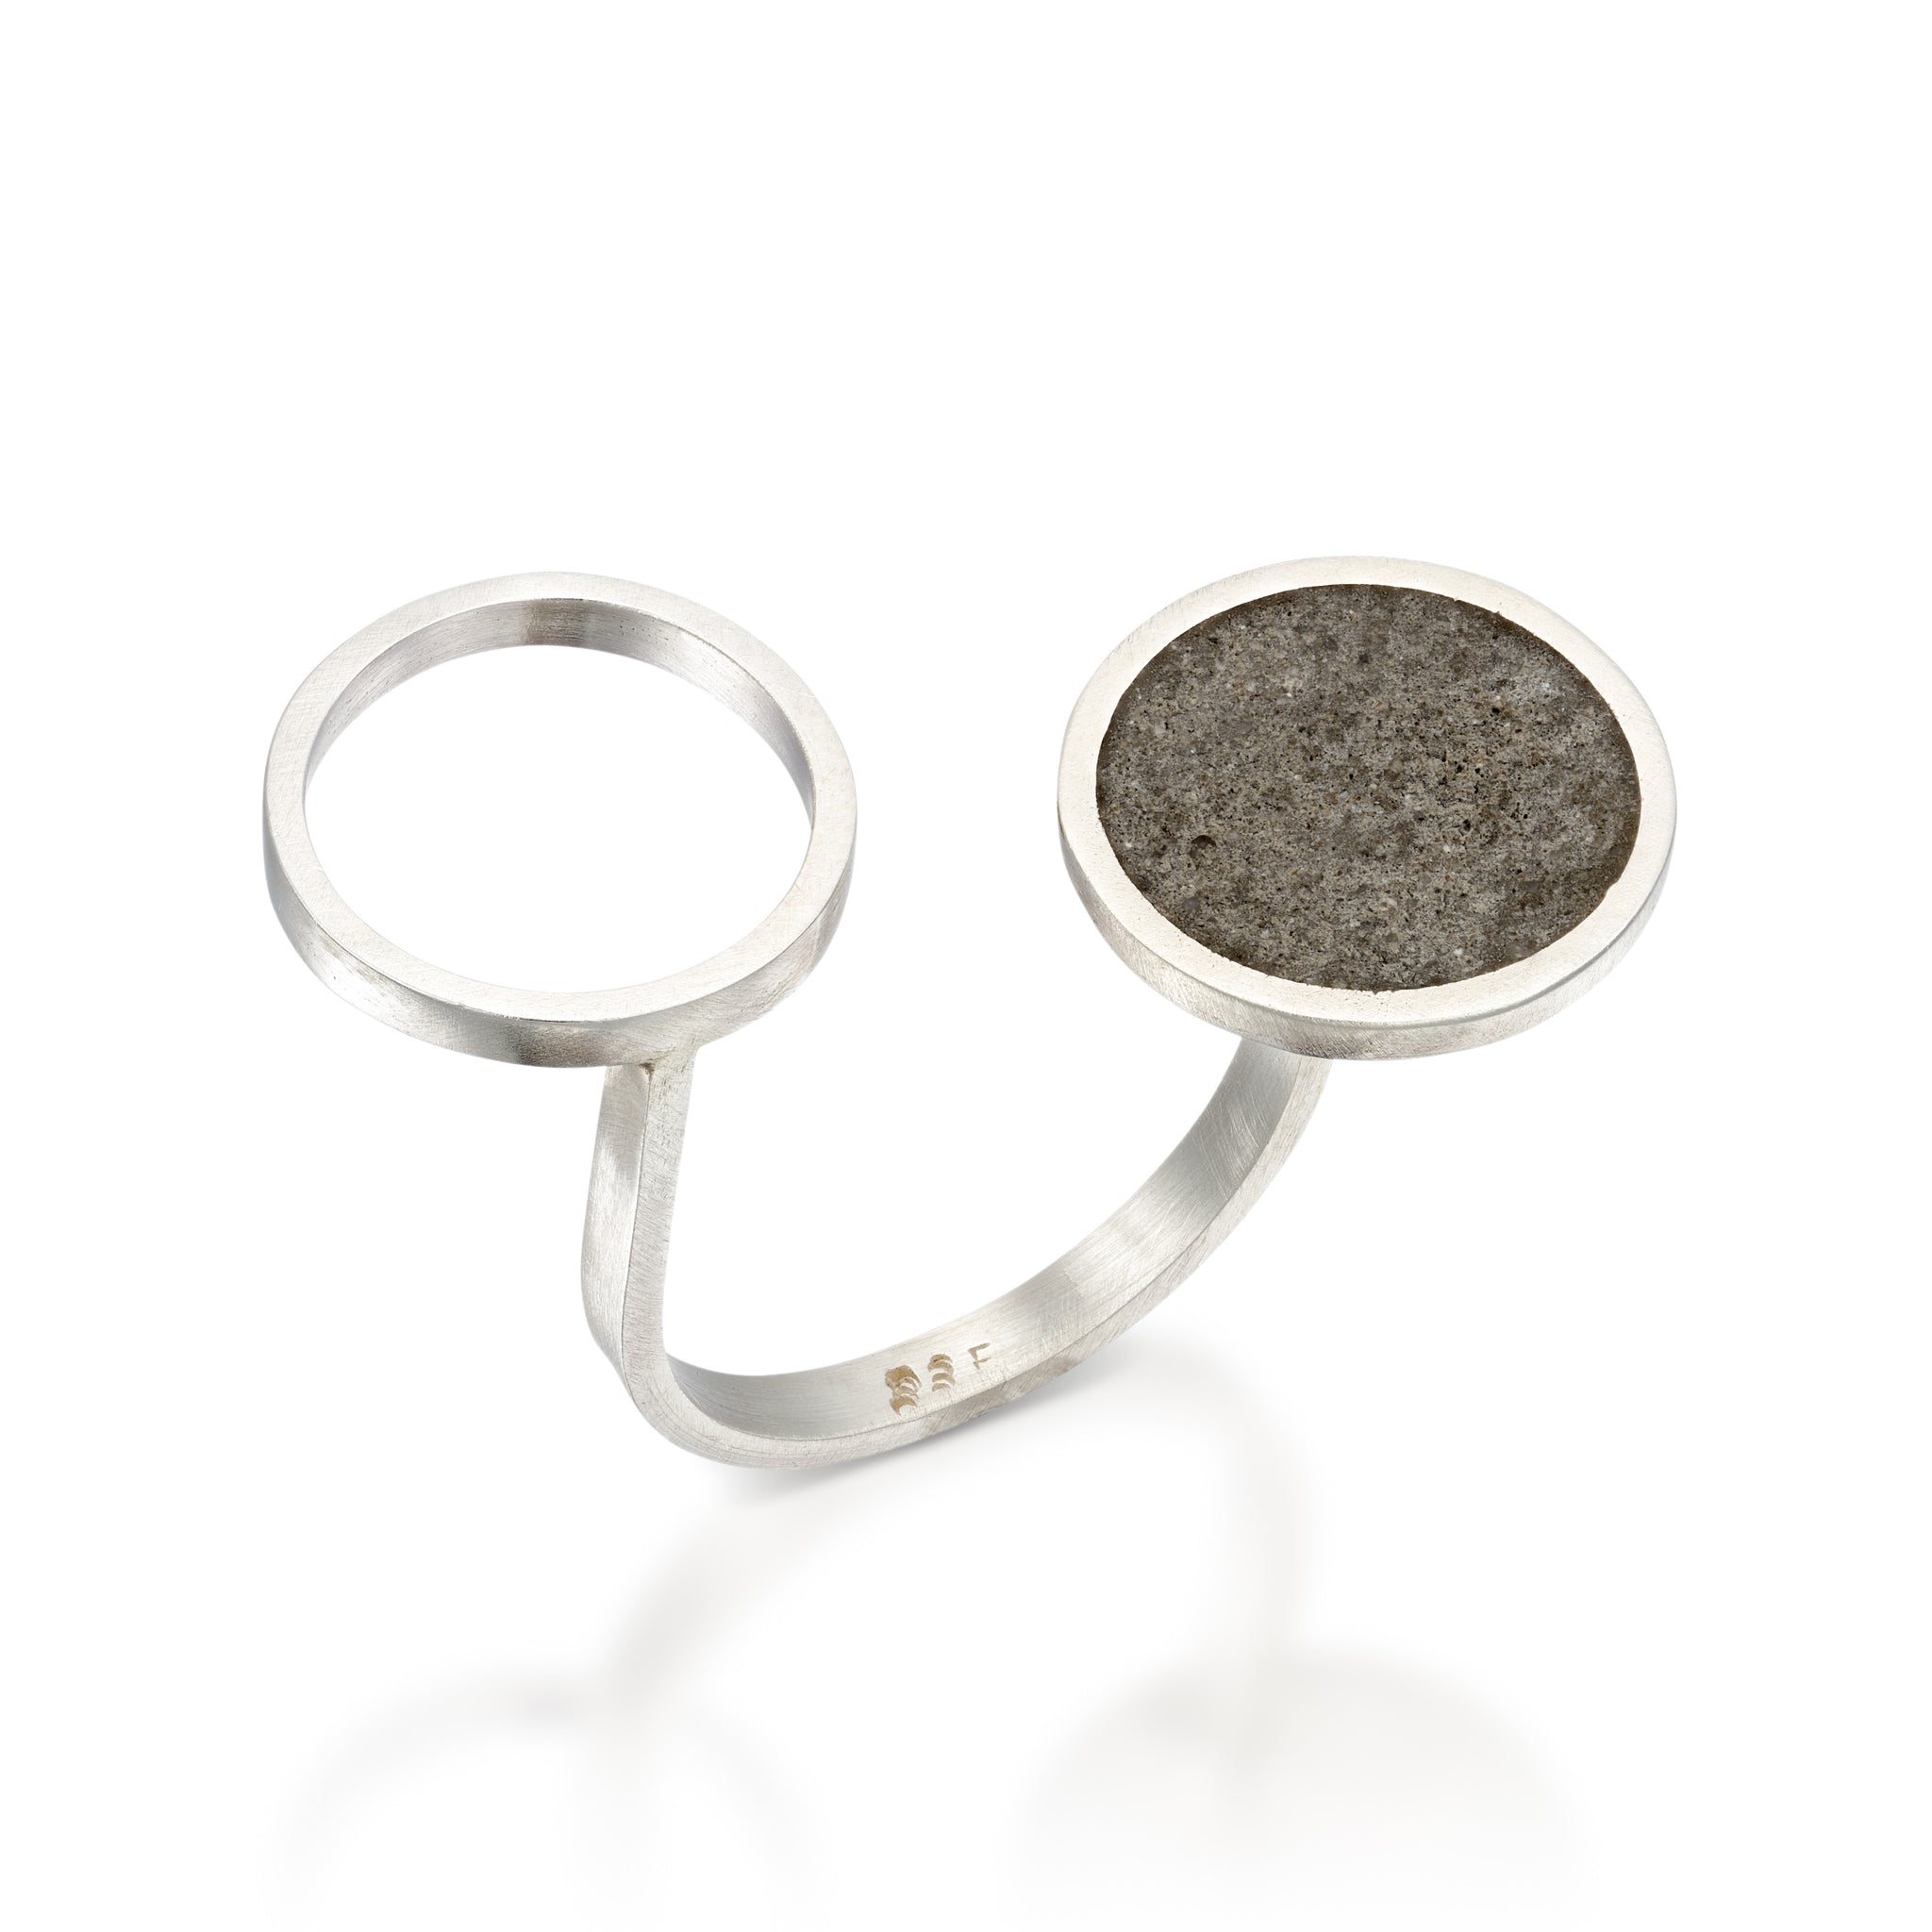 Double Circles Concrete Ring, Statement Ring, Unique Jewelry, Urban Jewelry, Silver and Concrete, Cement Ring, Adjustable Ring